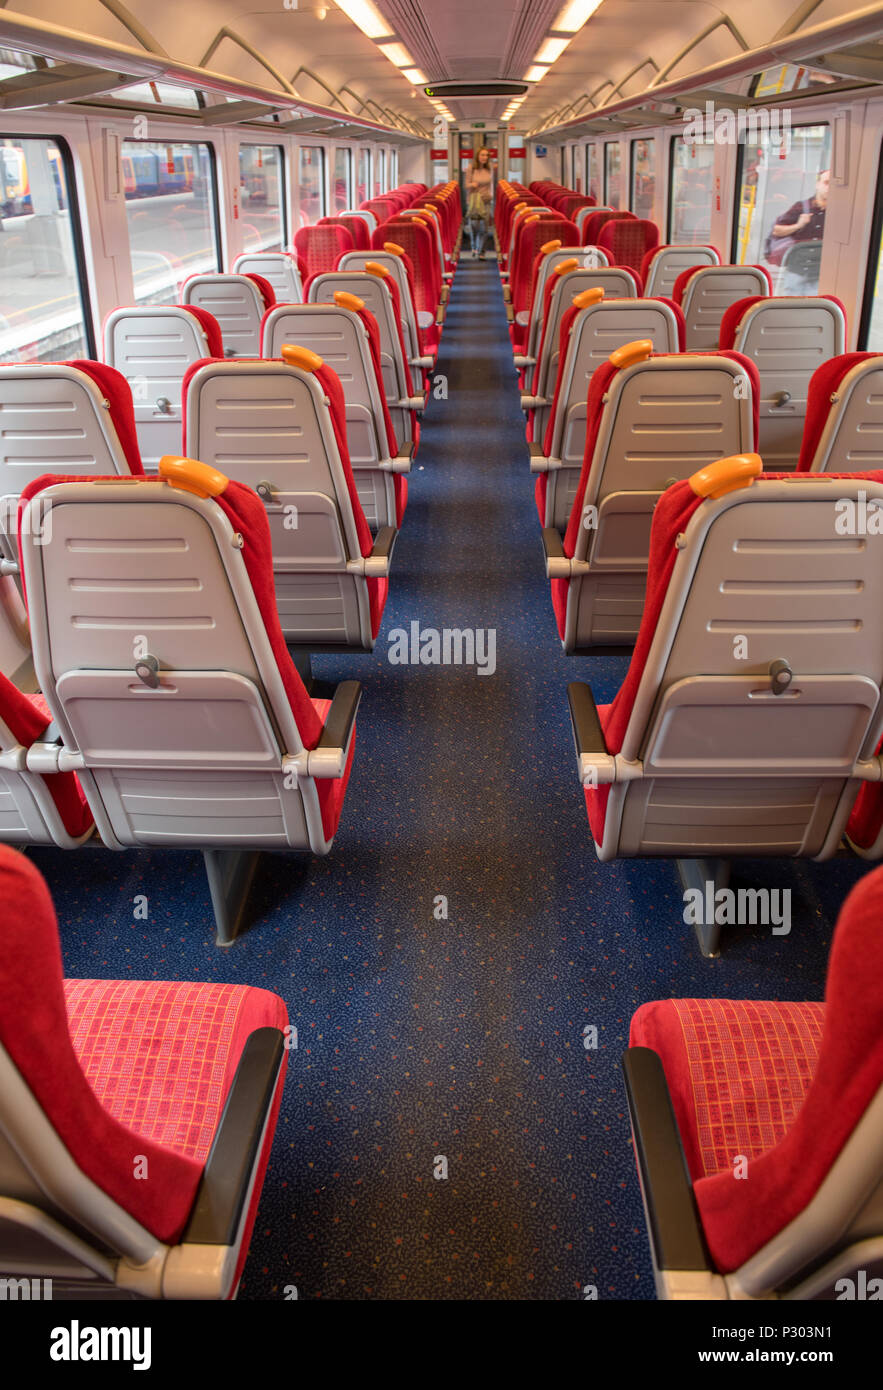 the inside or interior of a modern commuter railway train carriage or coach with upholstered seats and empty. modern rail coach rolling stock and seat Stock Photo